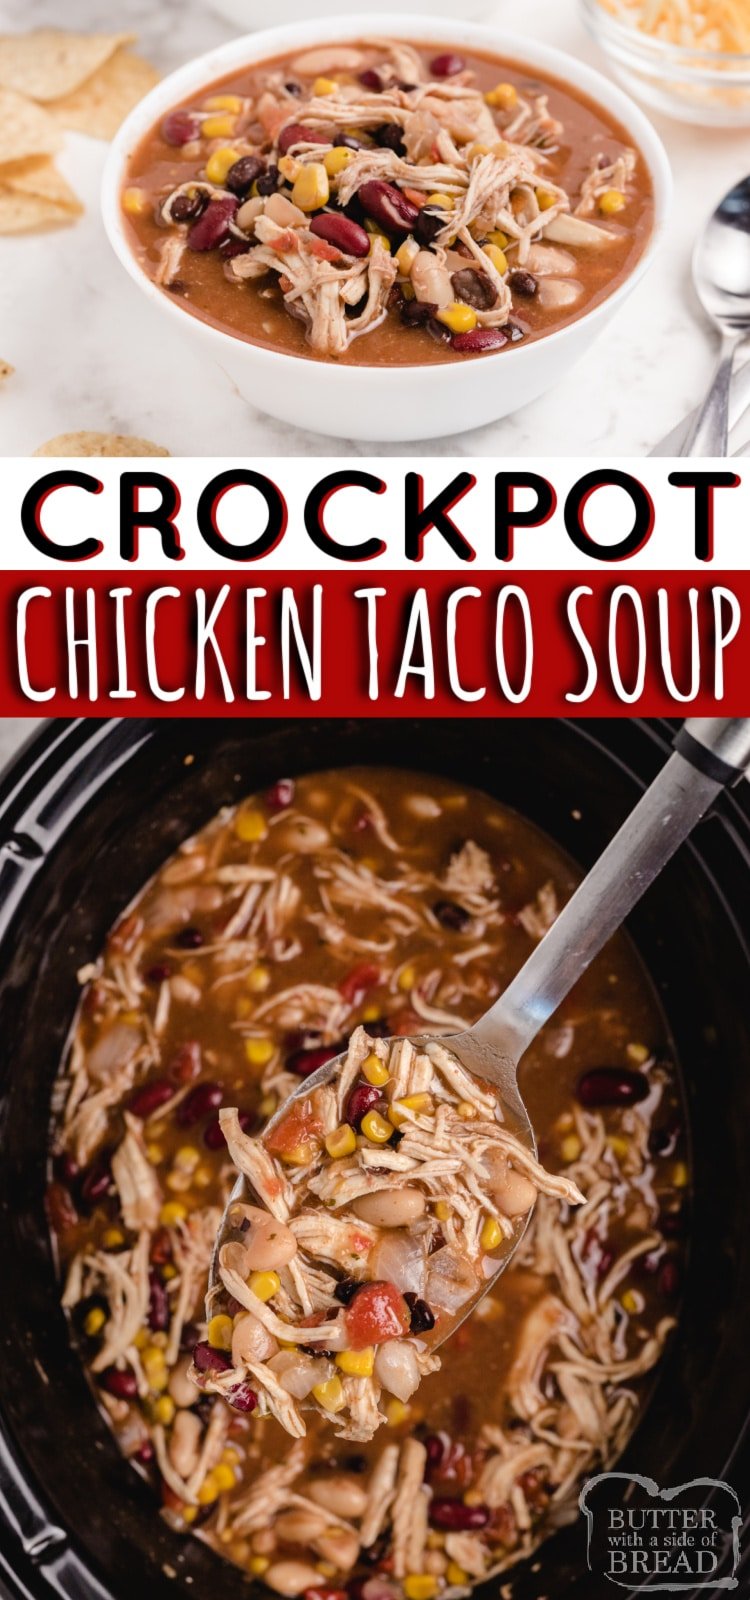 Crockpot Chicken Taco Soup packed with chicken, beans, tomatoes and tons of flavor! Easy "dump and go" slow cooker chicken taco soup recipe with less than 5 minutes of prep time! 